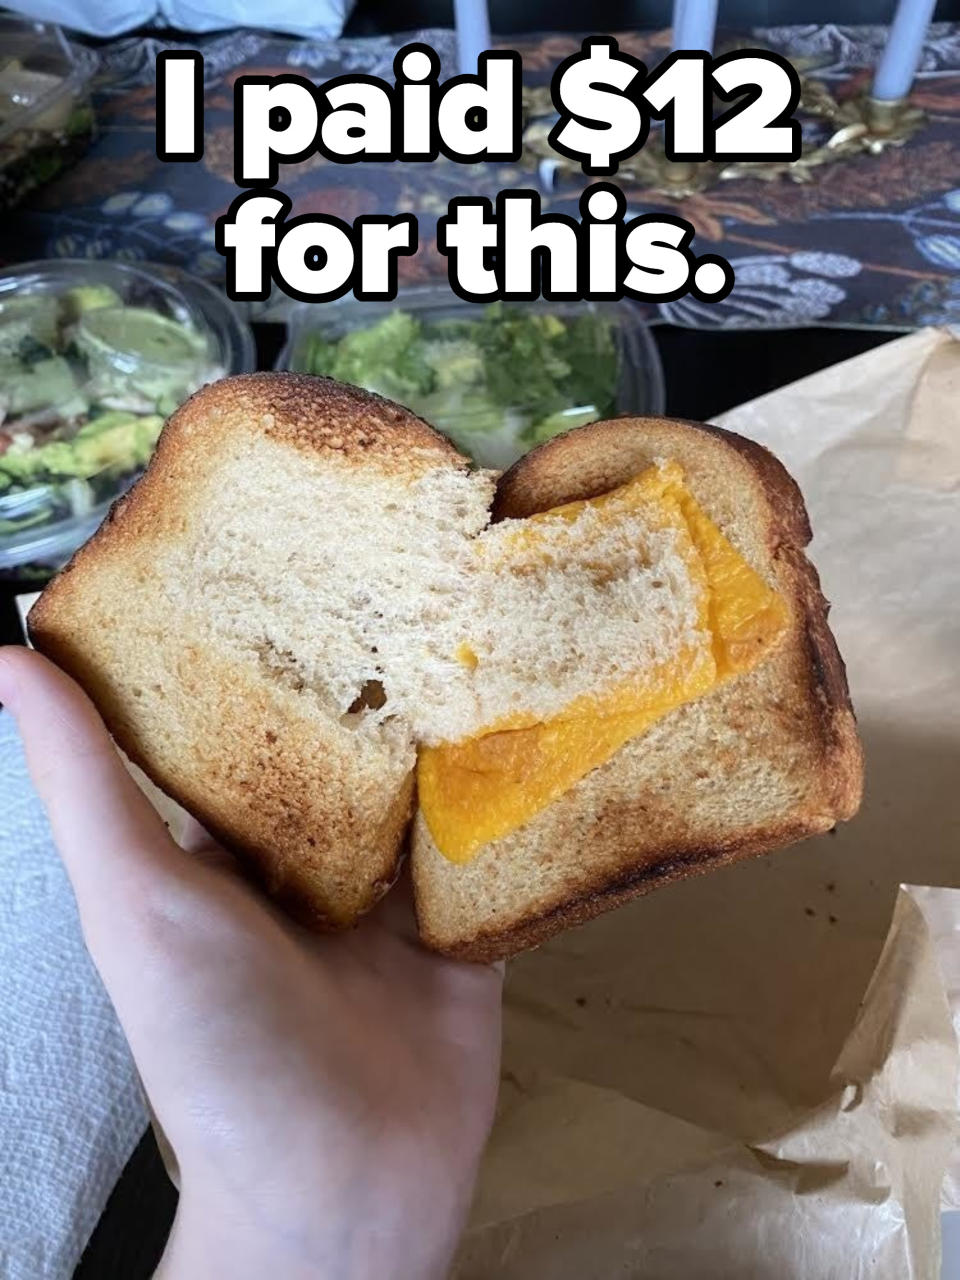 A "grilled cheese" with just a thin slice of overcooked American cheese with the caption "I paid $12 for this"